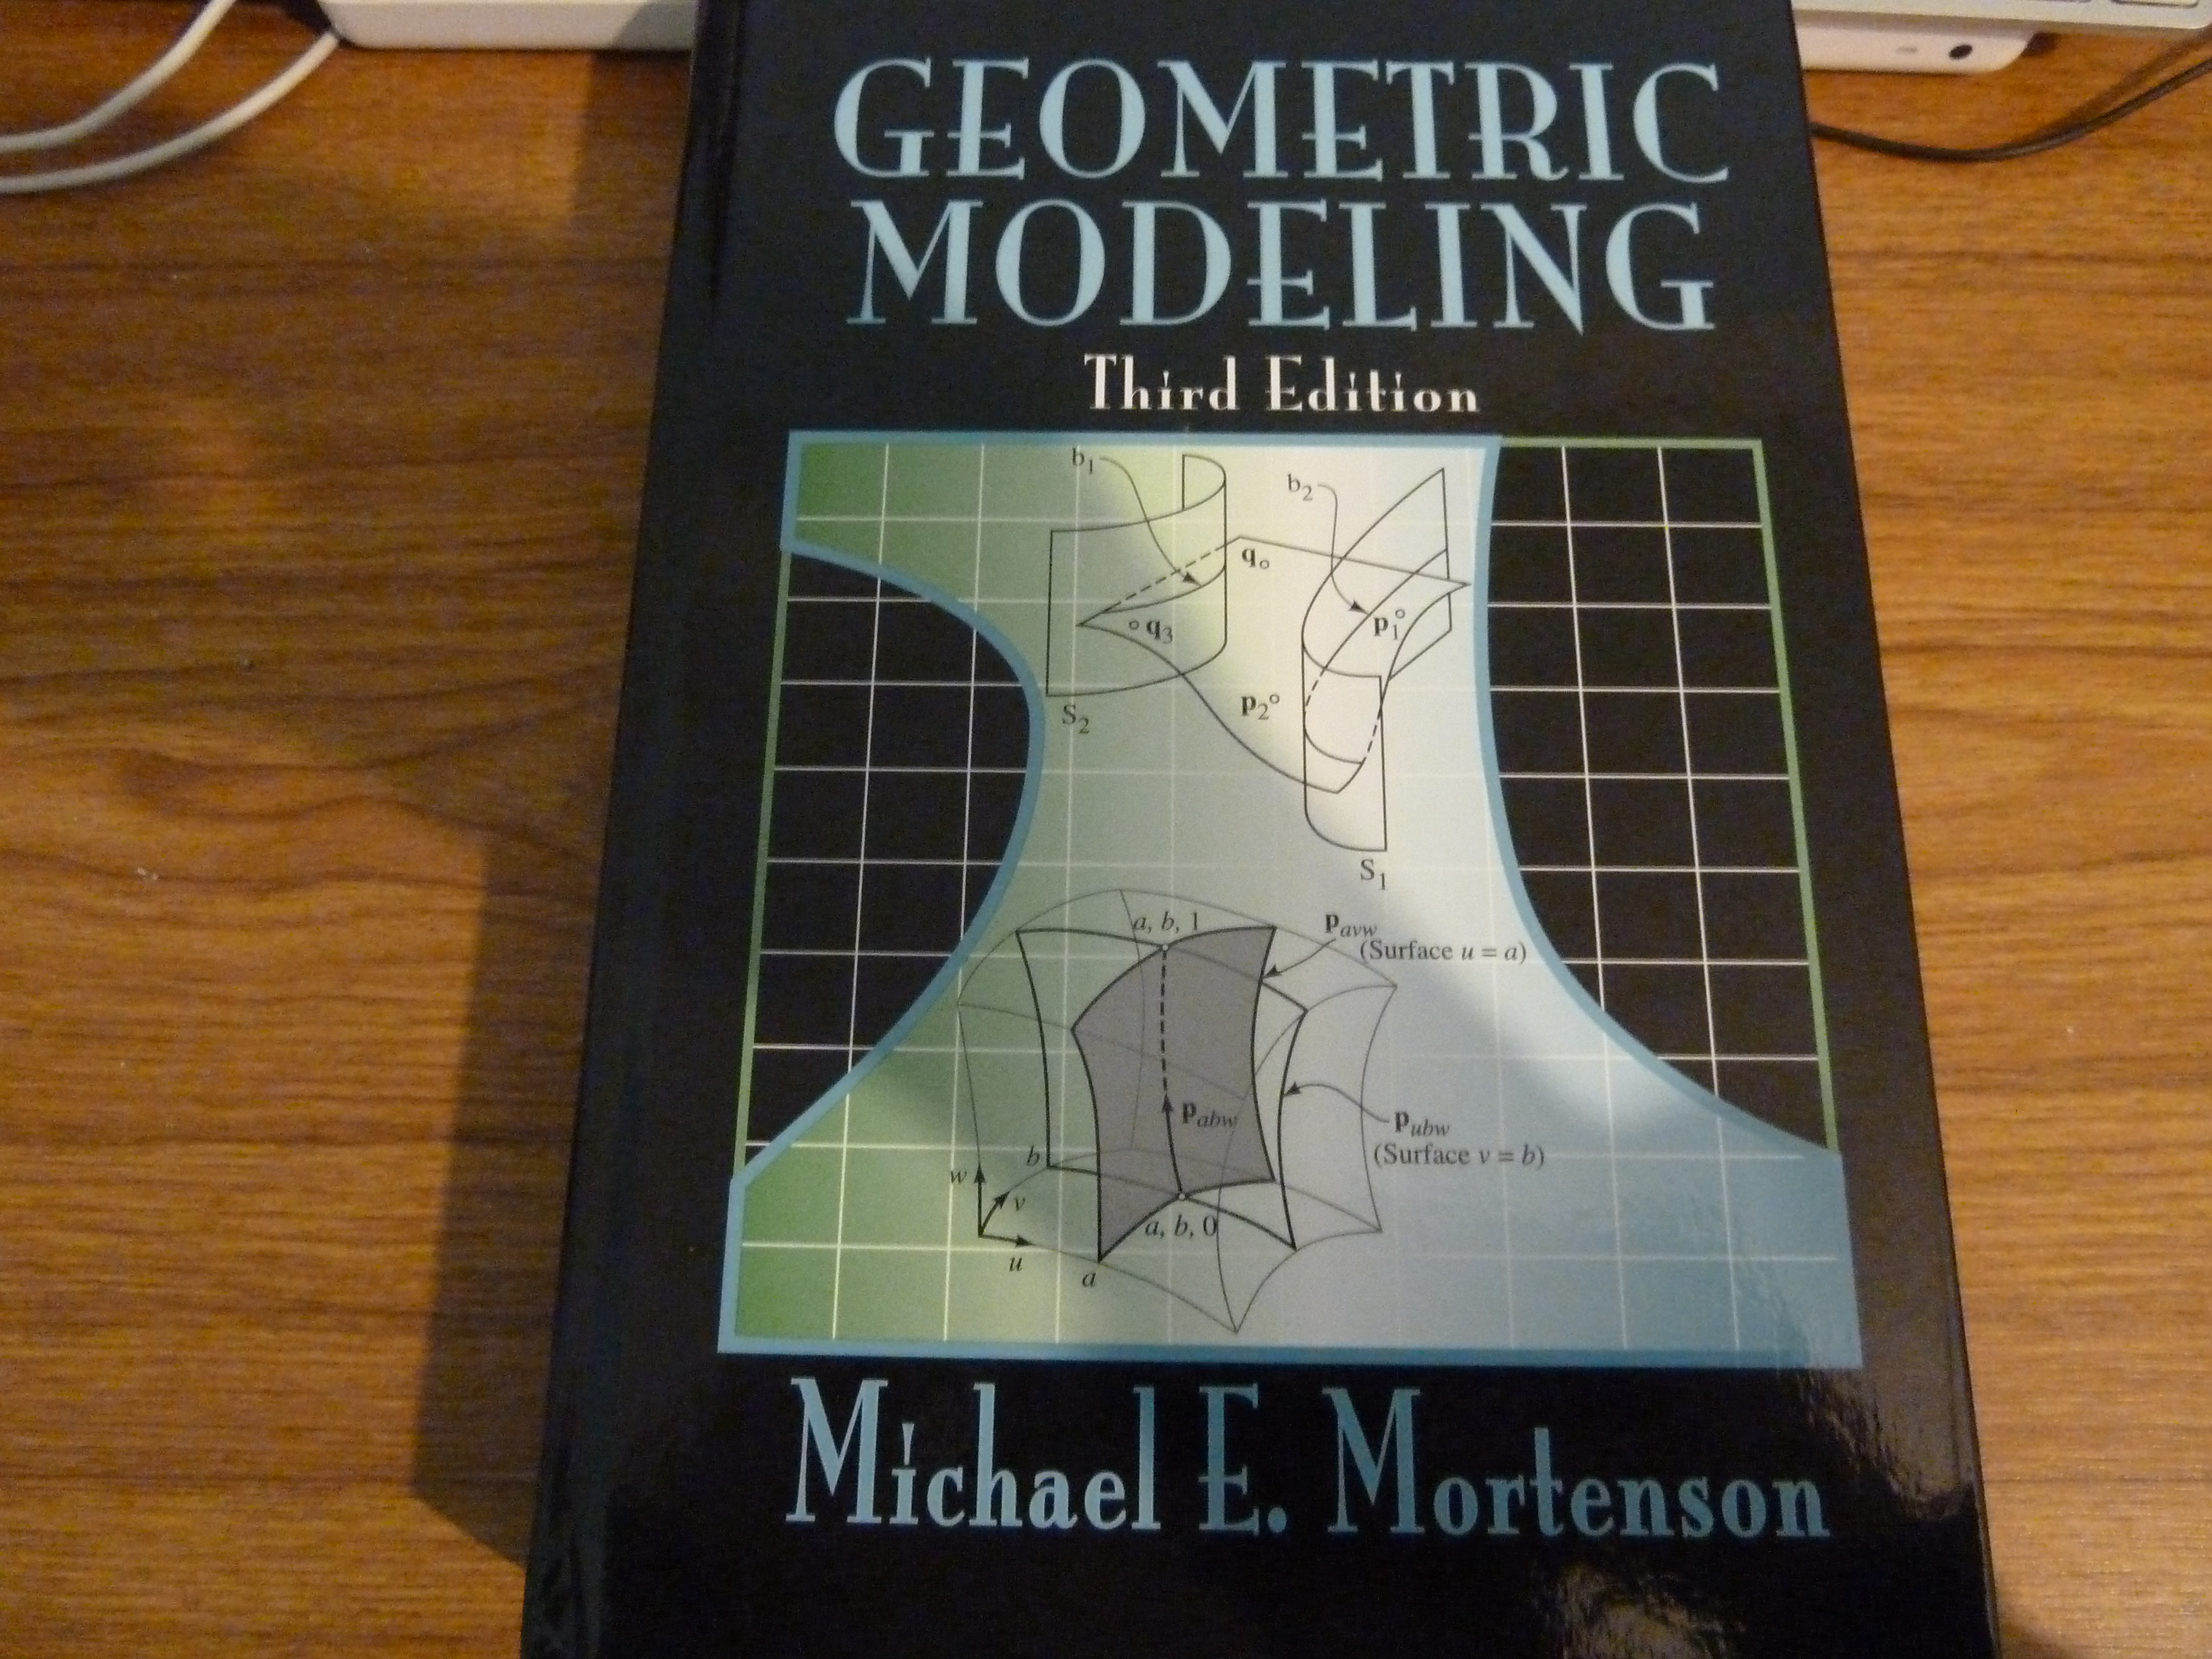 Photo of the book Geometric Modeling